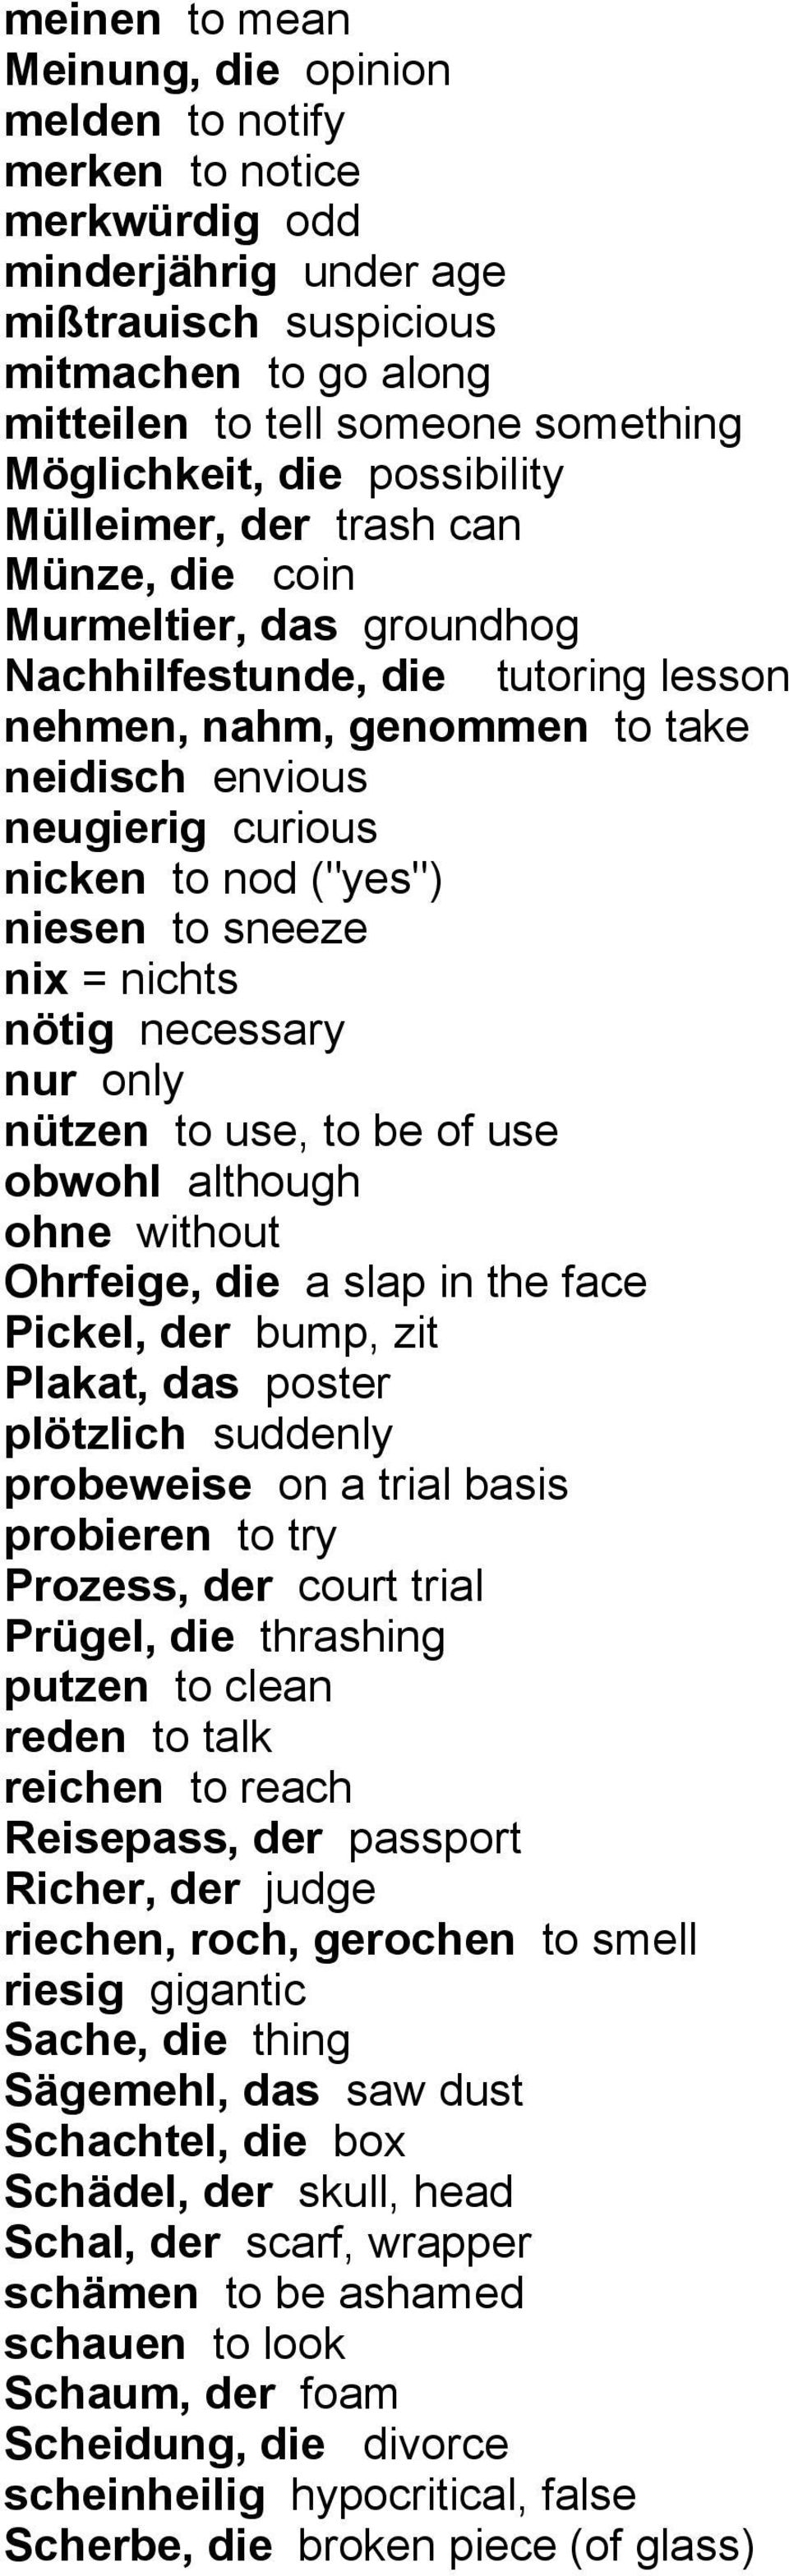 nicken to nod ("yes") niesen to sneeze nix = nichts nötig necessary nur only nützen to use, to be of use obwohl although ohne without Ohrfeige, die a slap in the face Pickel, der bump, zit Plakat,